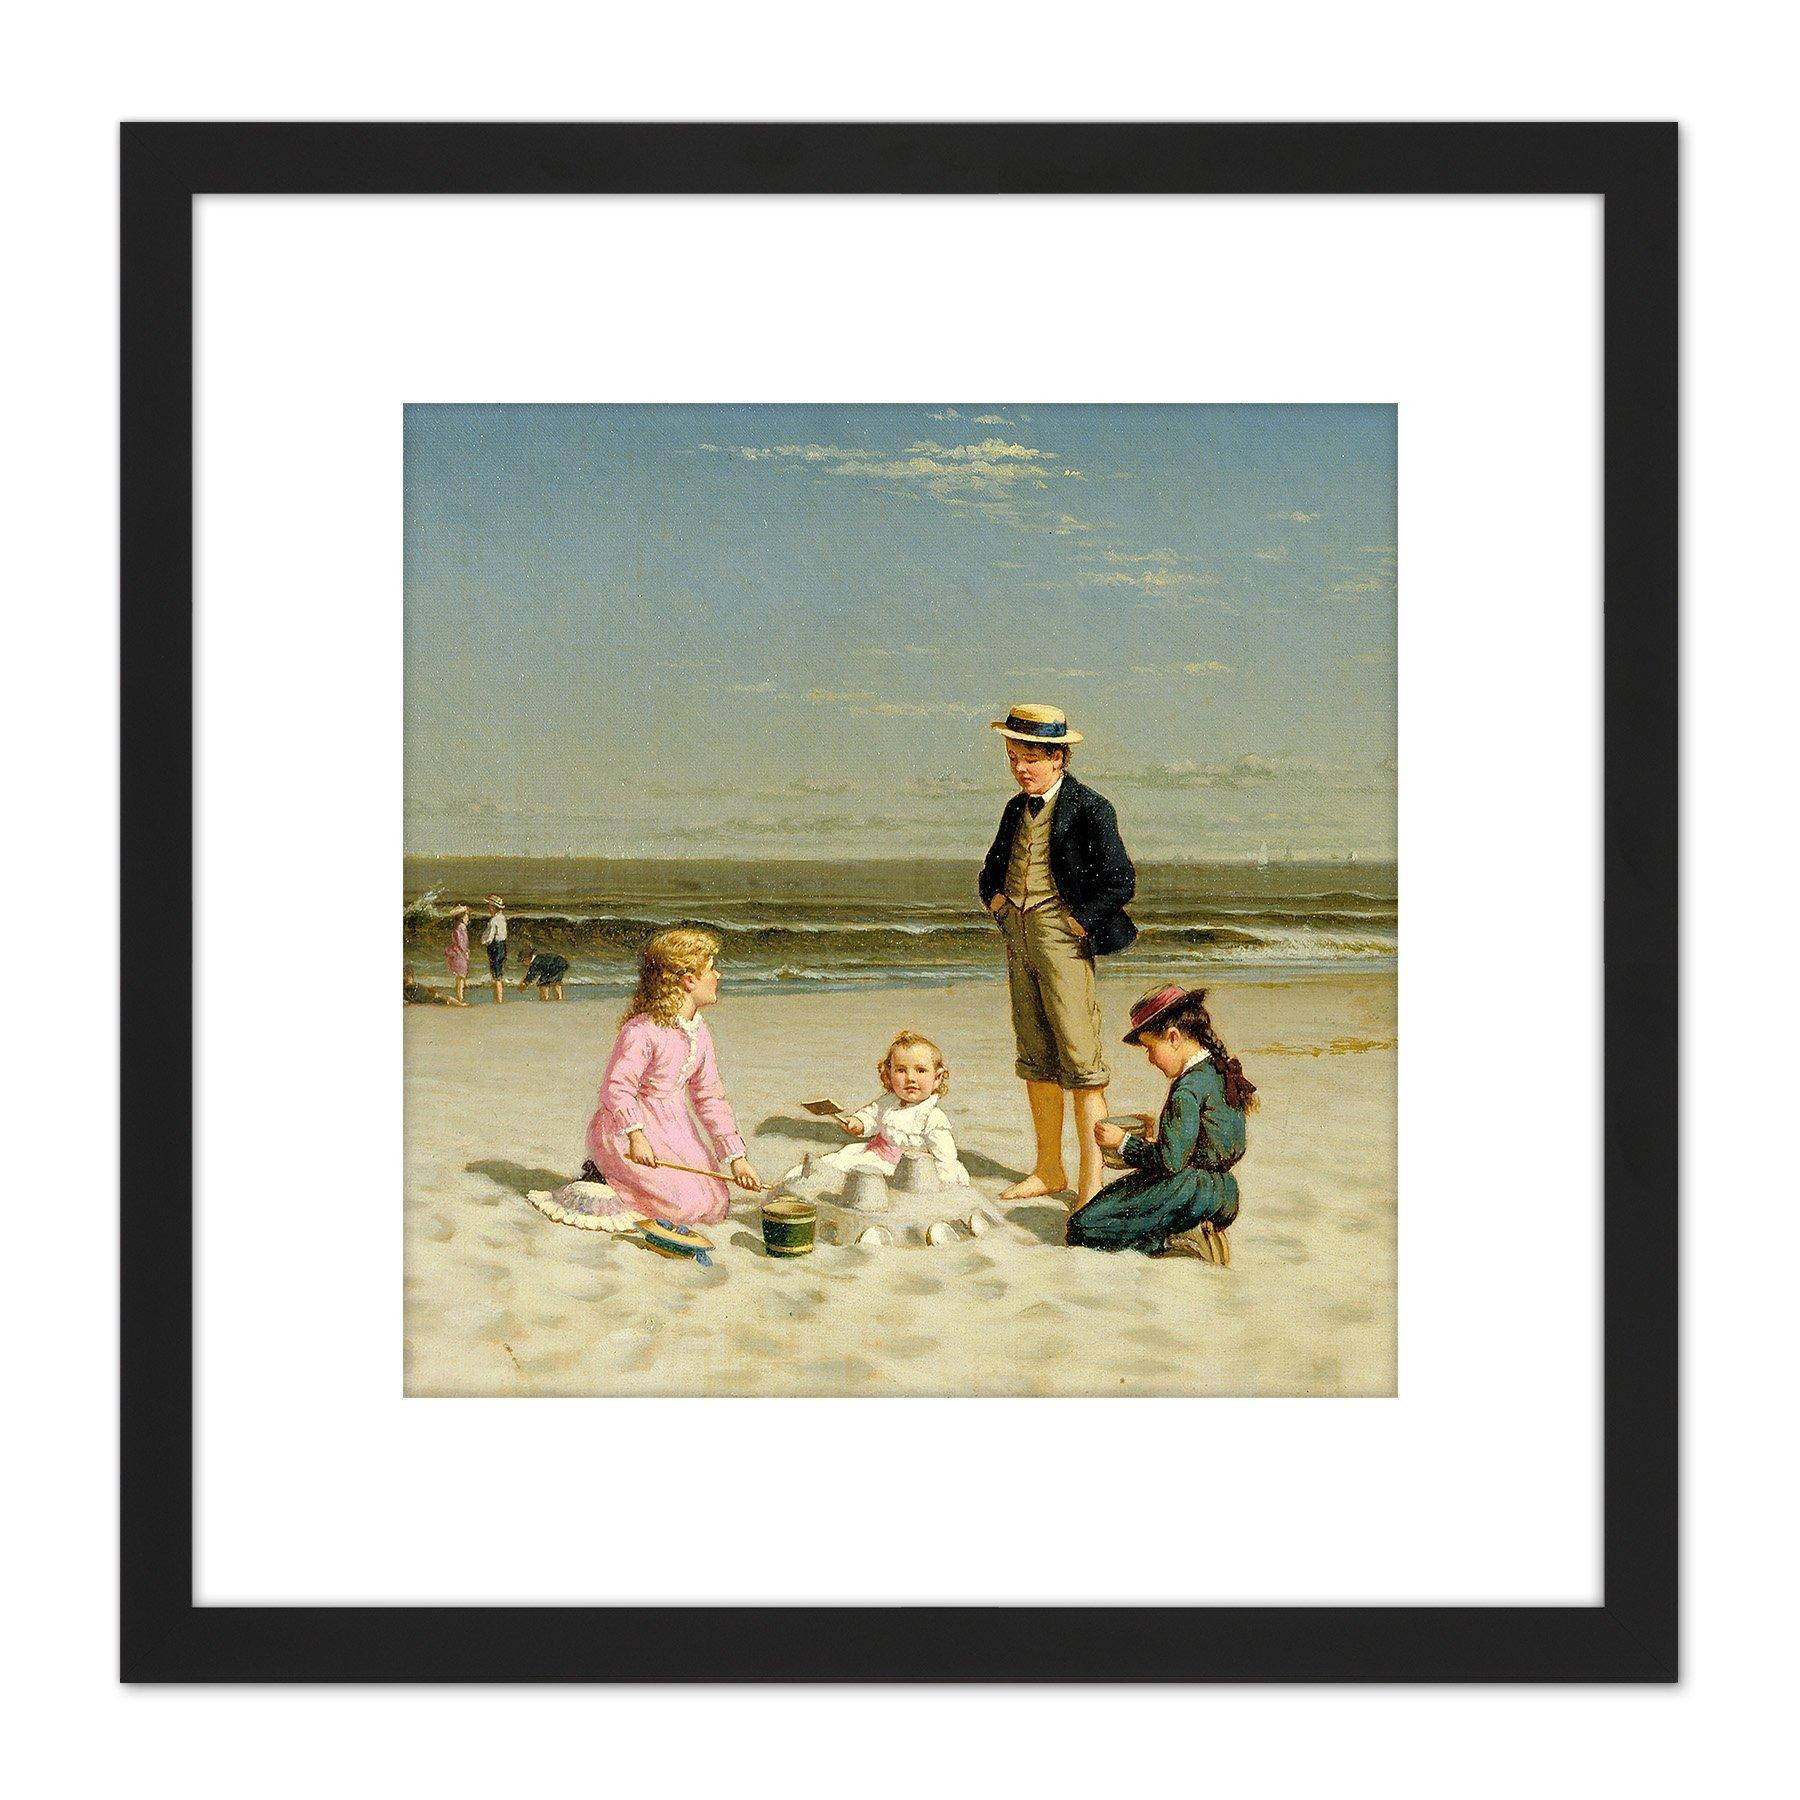 Carr Children Playing On The Beach 1879 Painting 8X8 Inch Square Wooden Framed Wall Art Print Picture with Mount - image 1